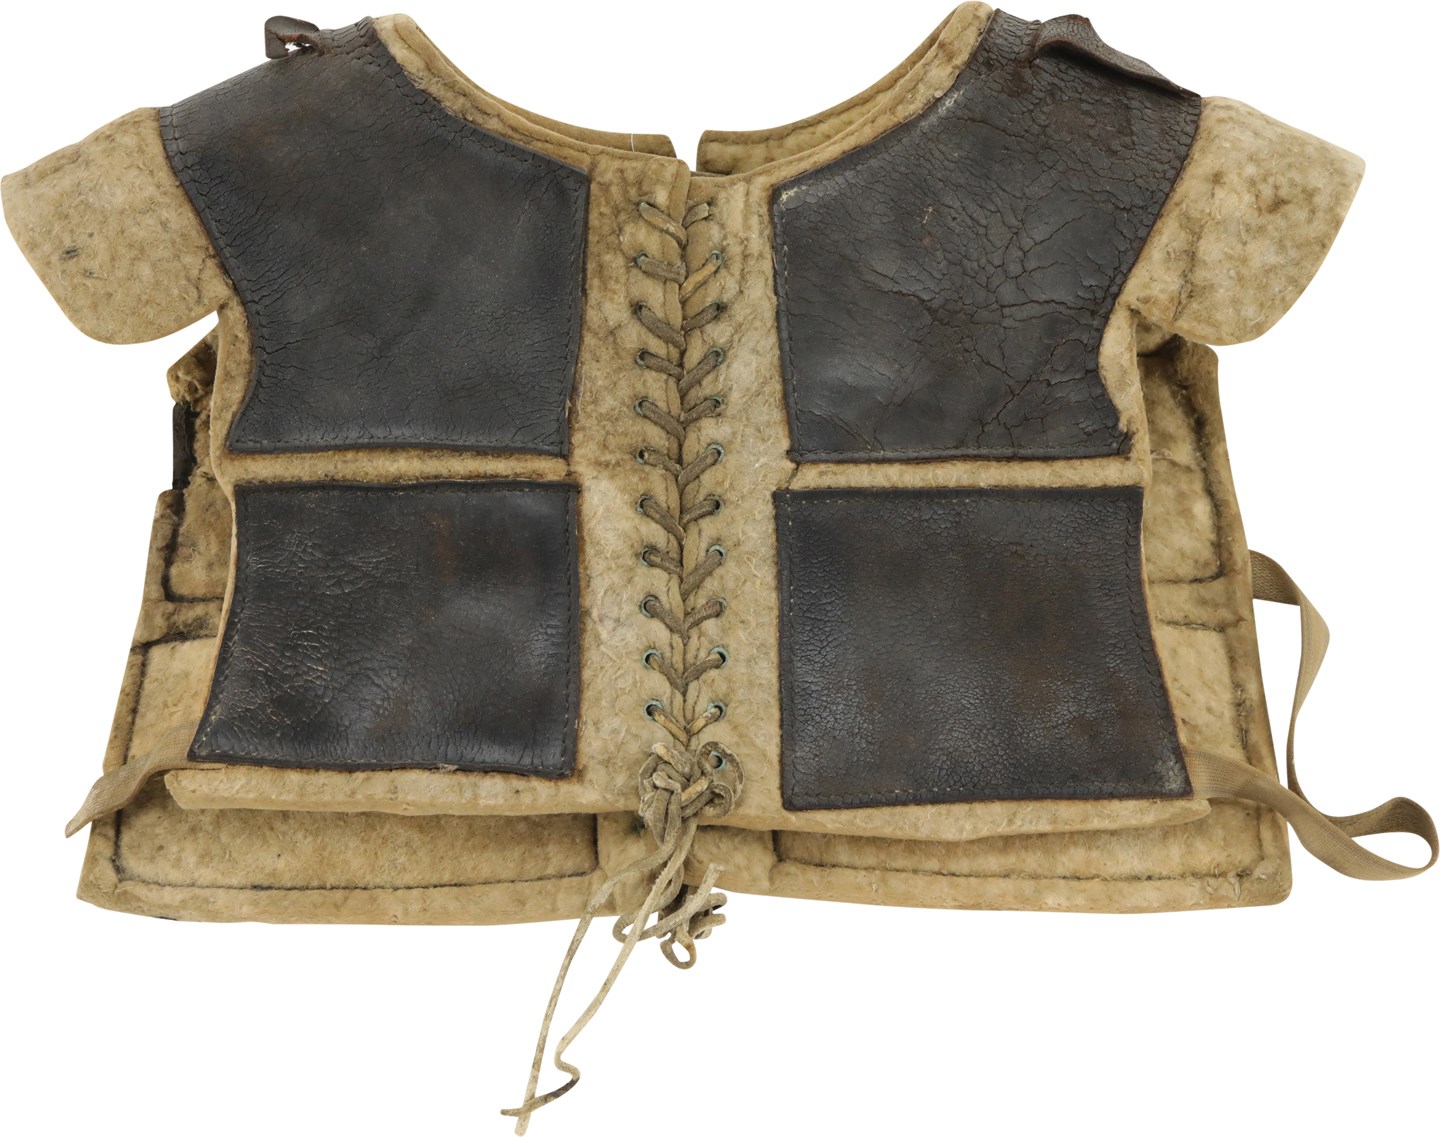 - Scarce Early 1900s Football Shoulder Pads